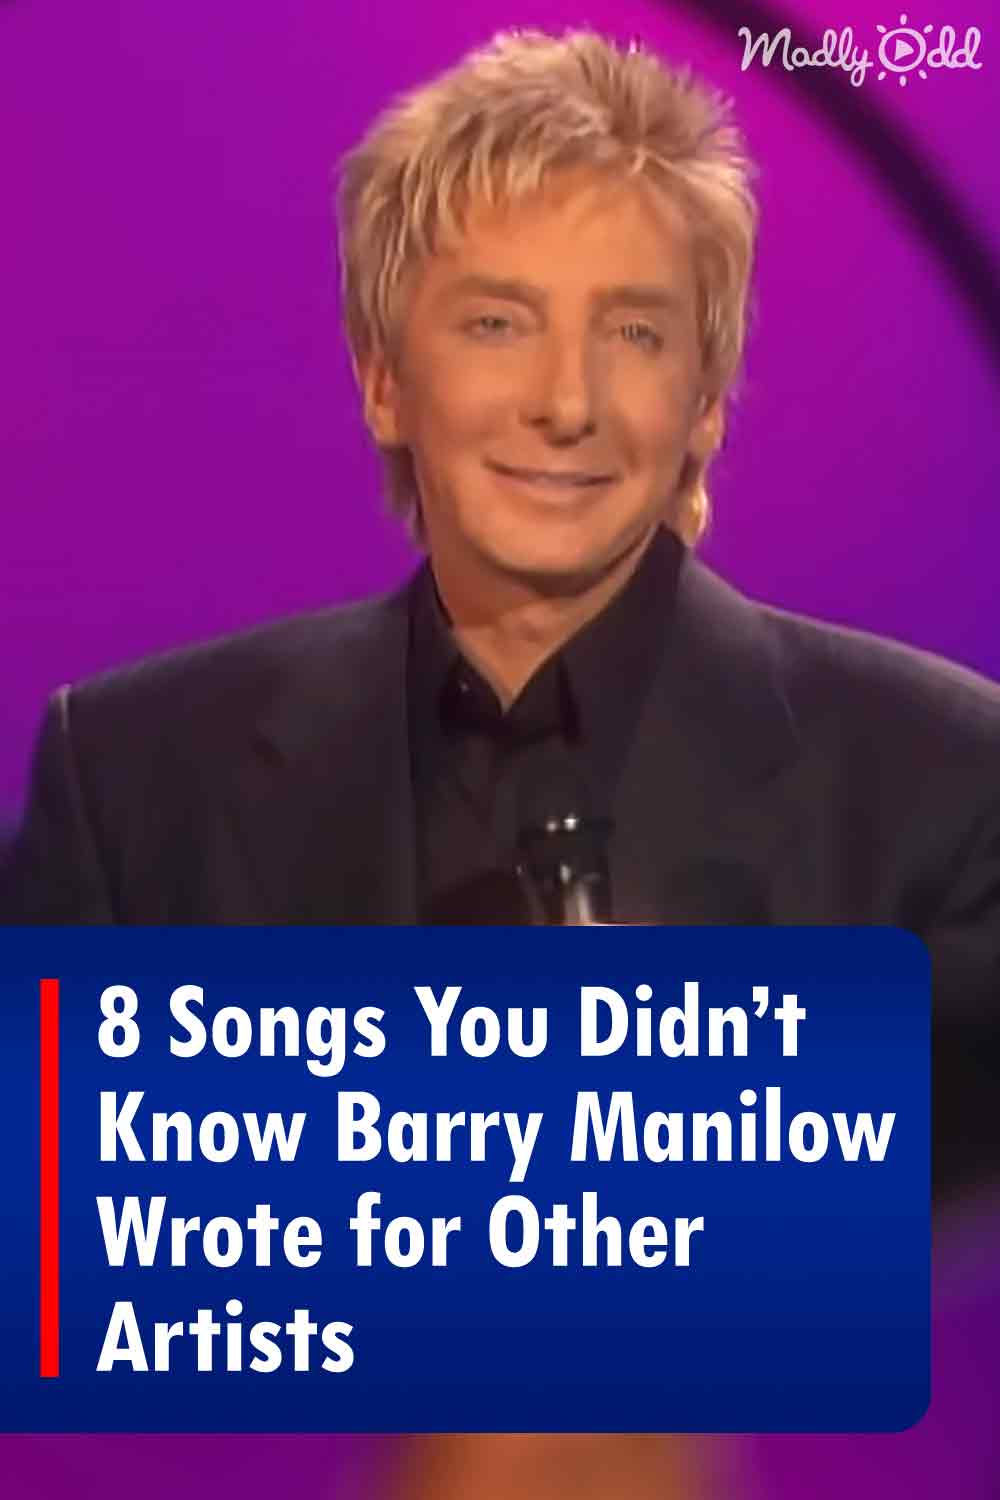 8 Songs You Didn’t Know Barry Manilow Wrote for Other Artists